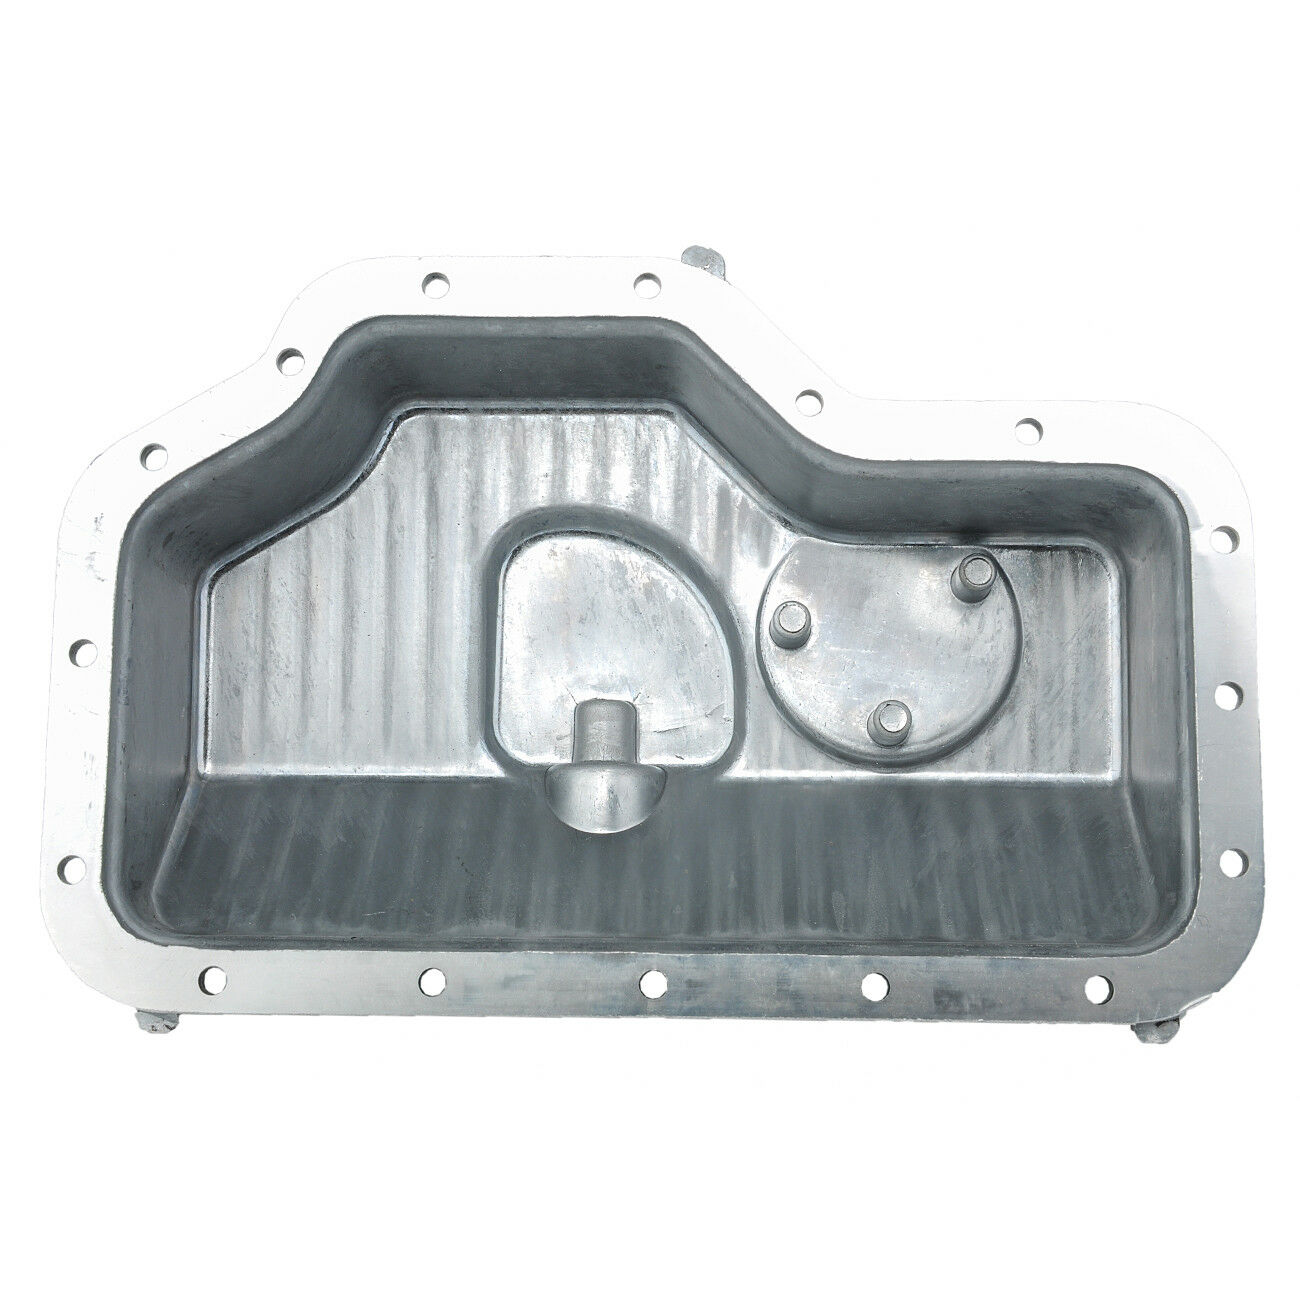 Lower Engine Oil Pan for BMW 3 E30 316i 318i 318is 1987-1994 11131715266 German Made